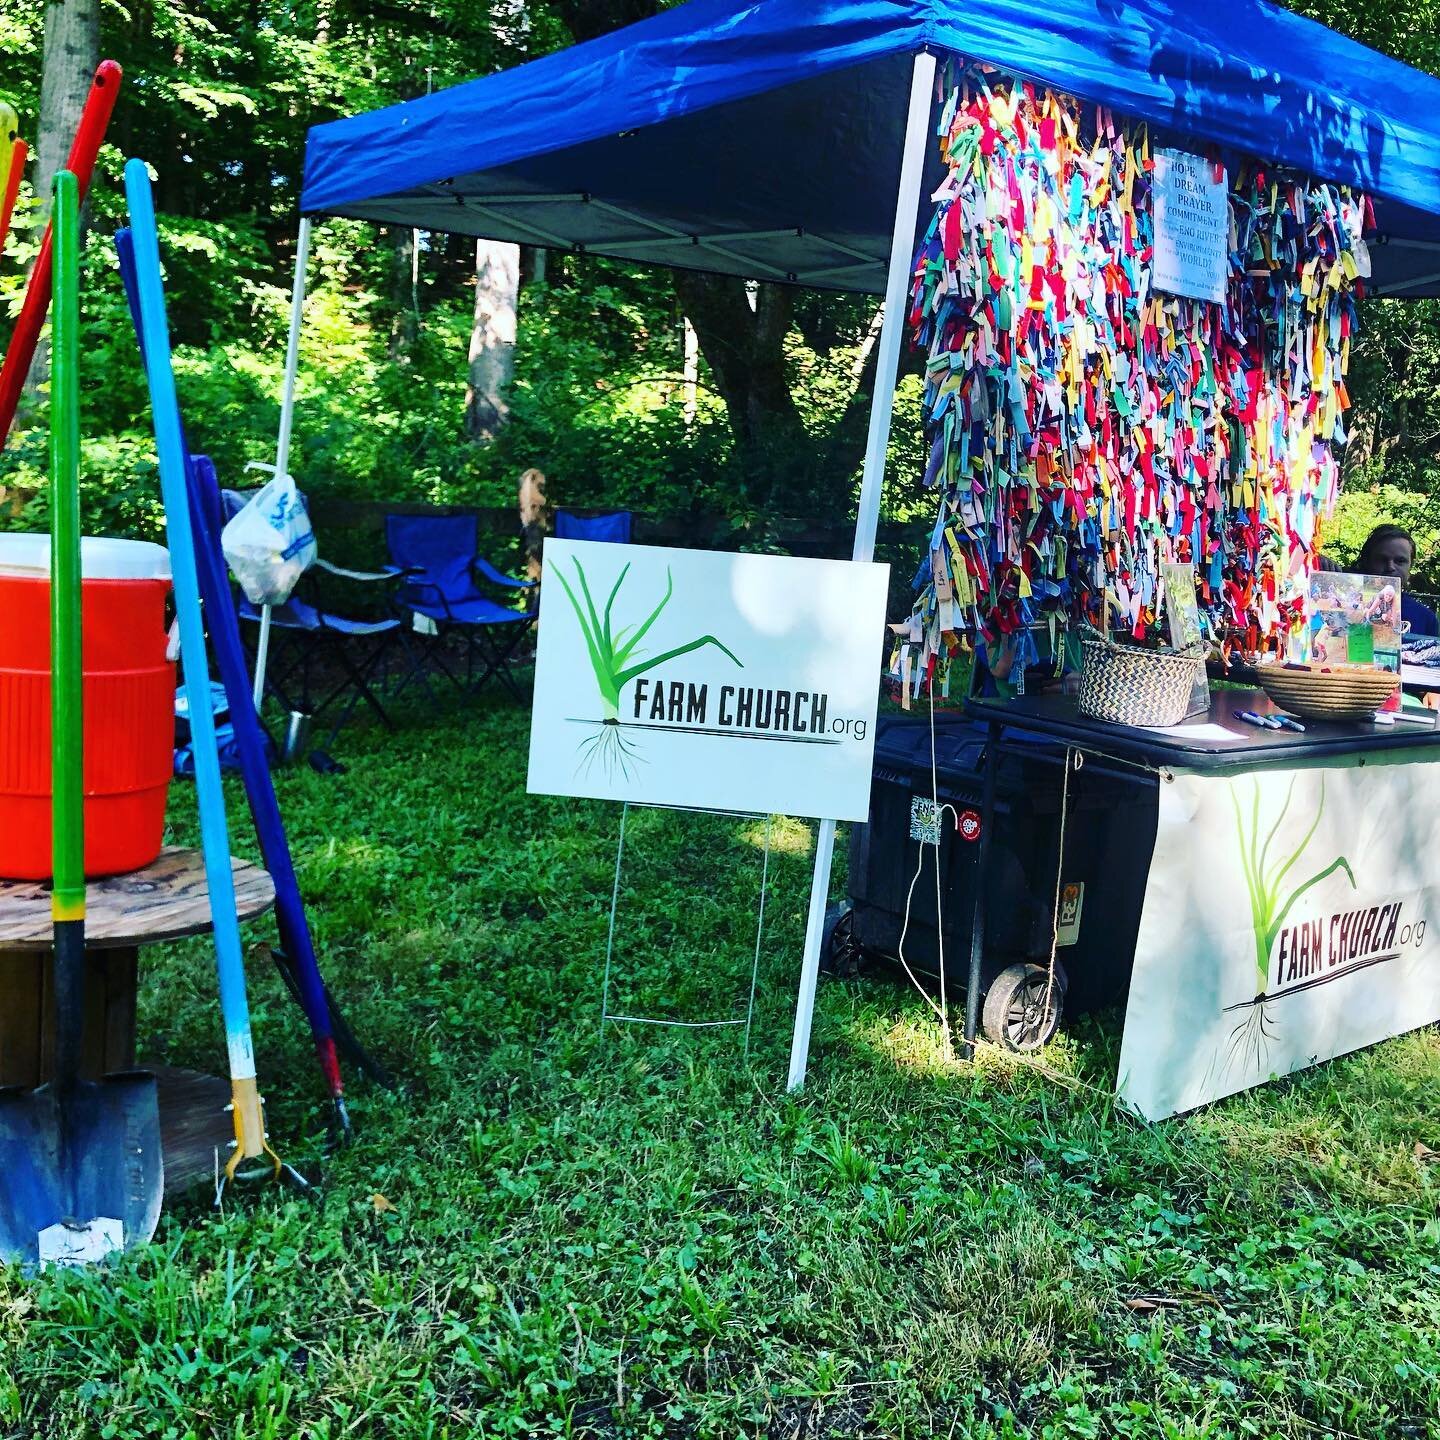 All set up at the @fest4eno! Come see us today or tomorrow - tie a prayer on the prayer wall, plant a seed, connect to this week&rsquo;s message from @ashleater, catch some bubbles, connect! Grateful to @fest4eno for having us. #farm #church #durham 